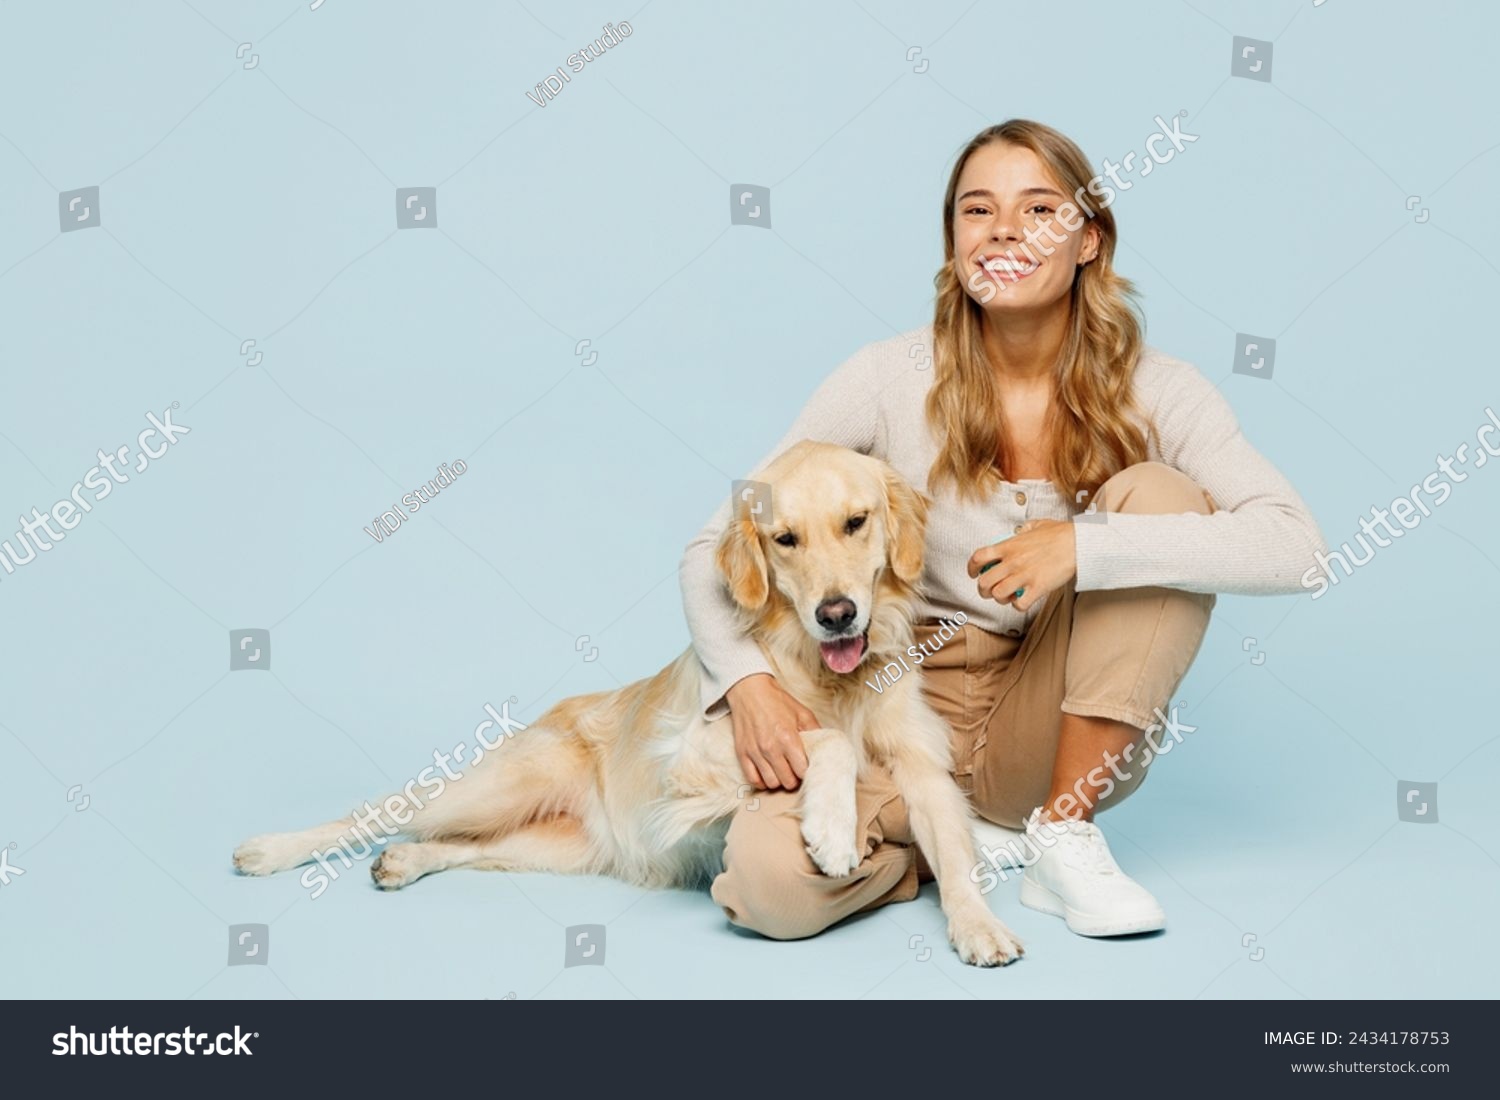 Full body smiling happy young owner woman wearing casual clothes sitting hug cuddle embrace her best friend retriever dog isolated on plain light blue background studio. Take care about pet concept #2434178753